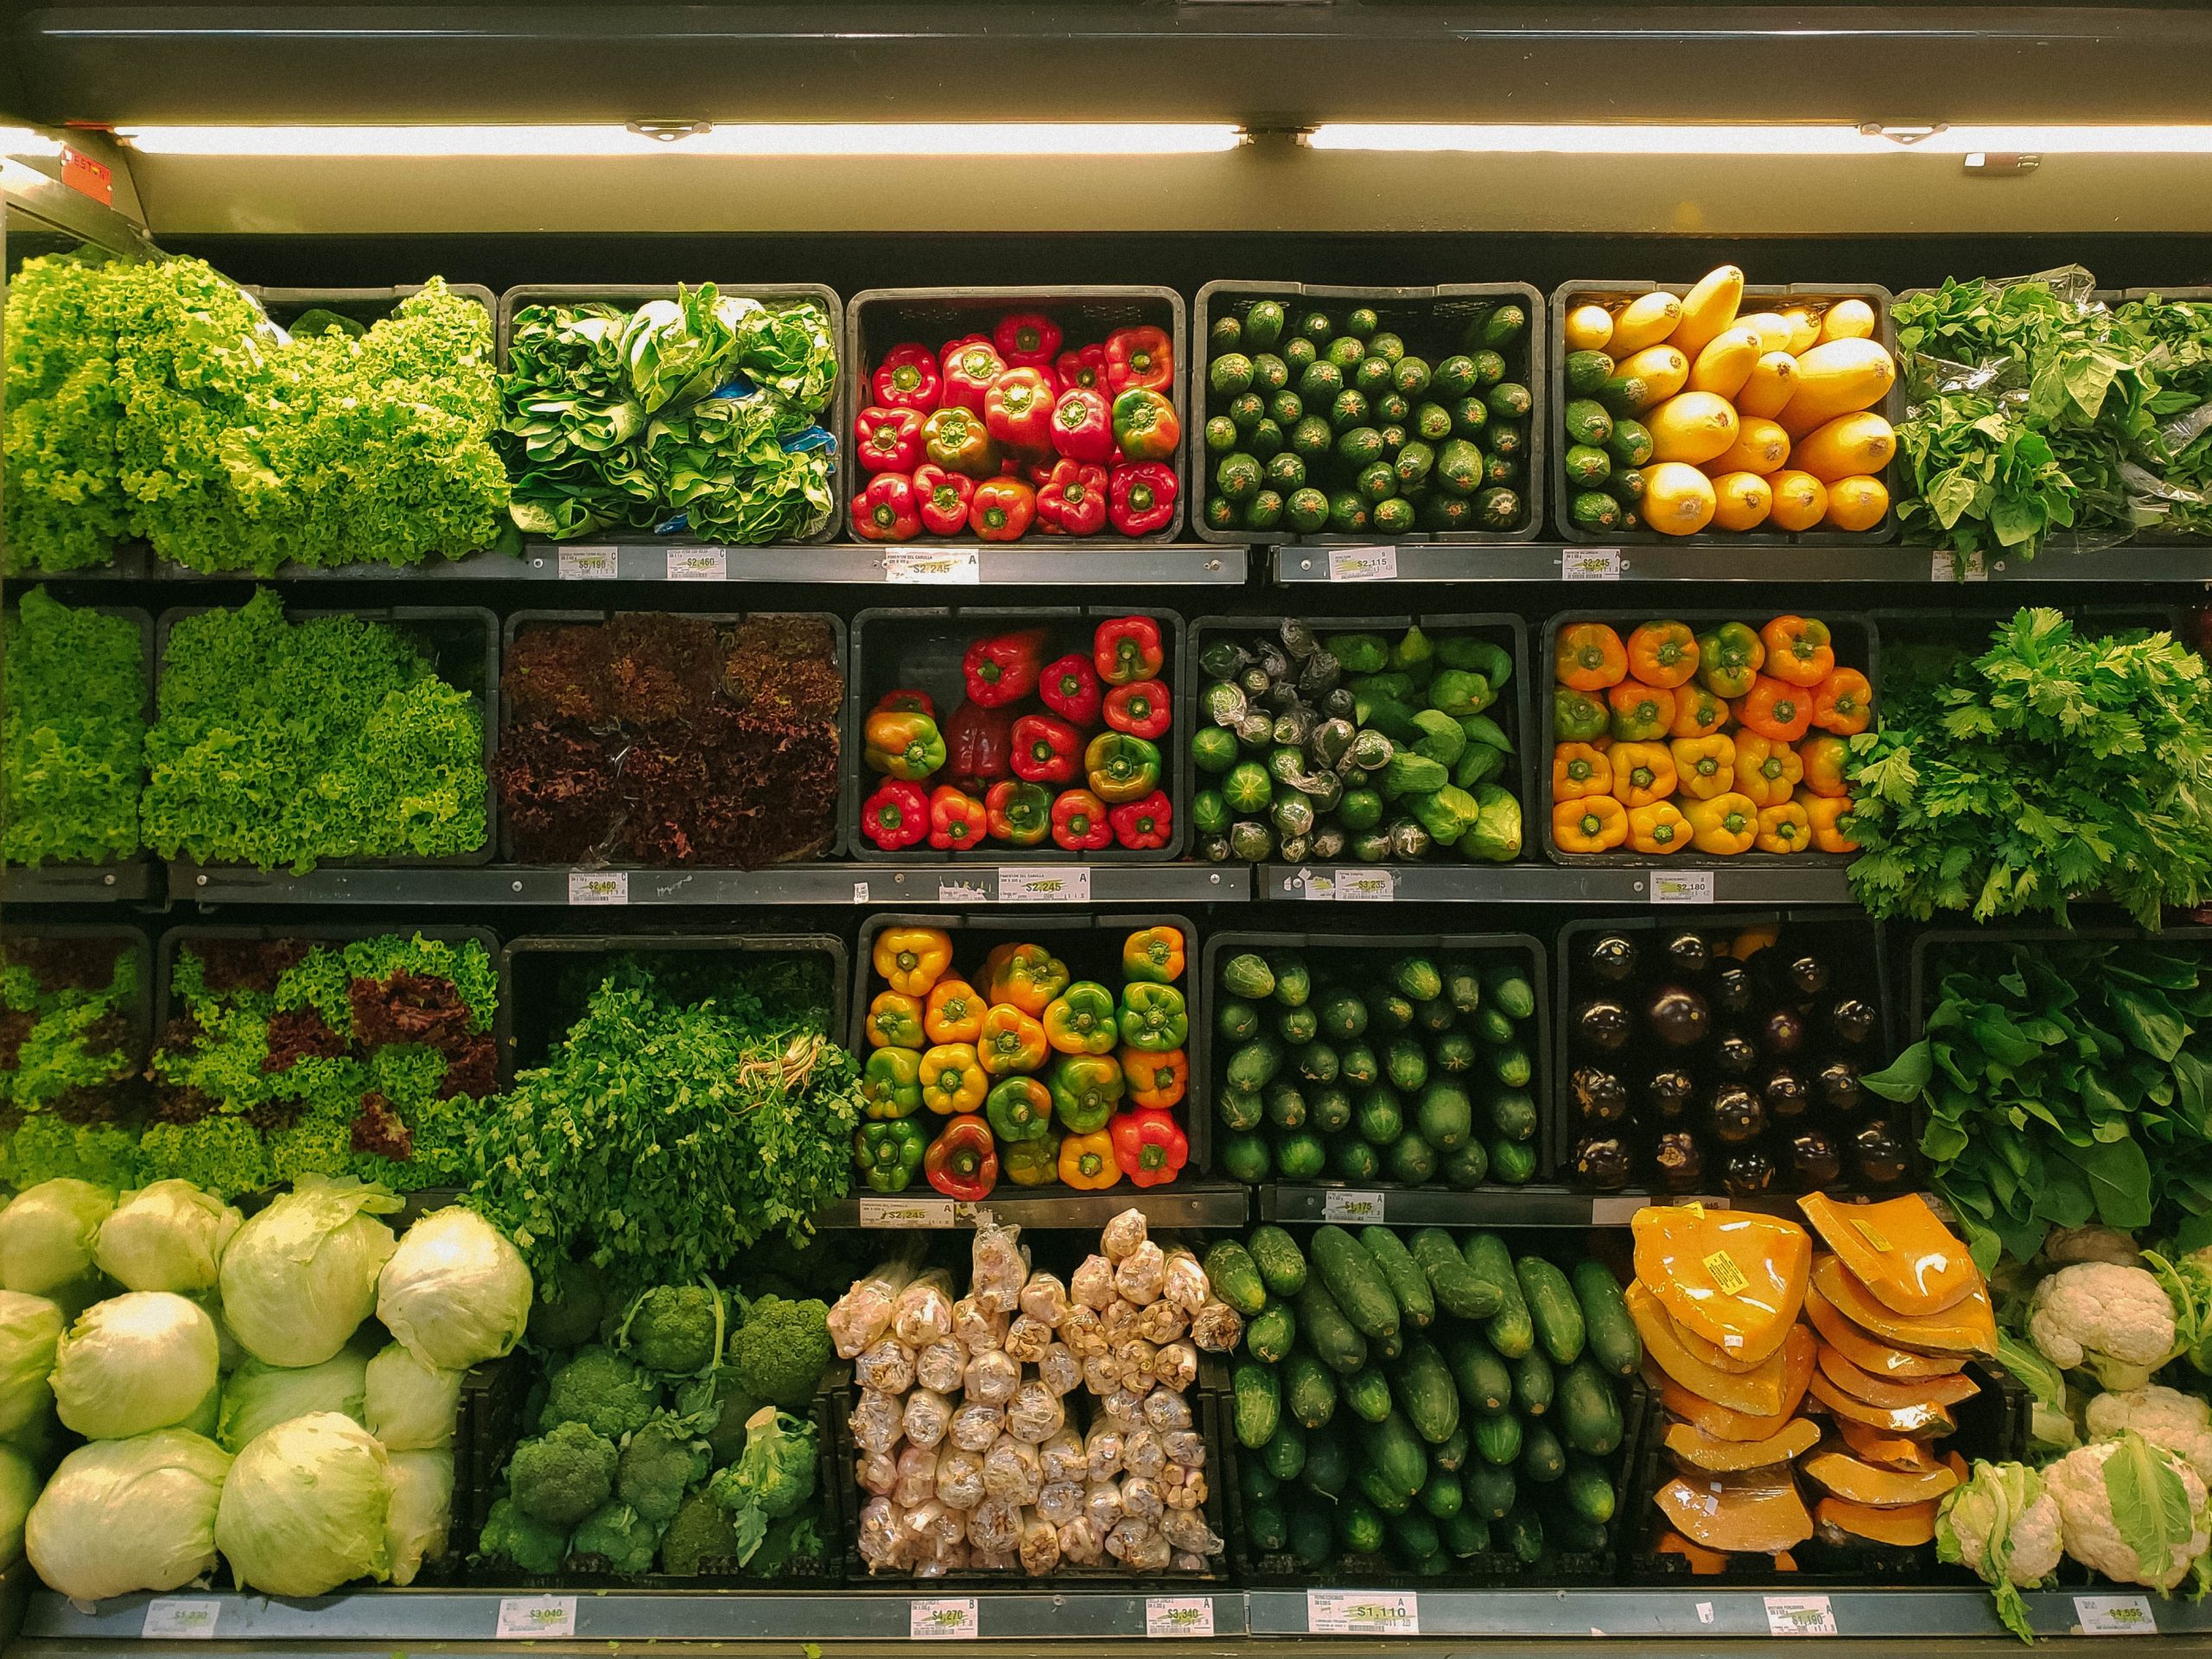 Grocery produce section